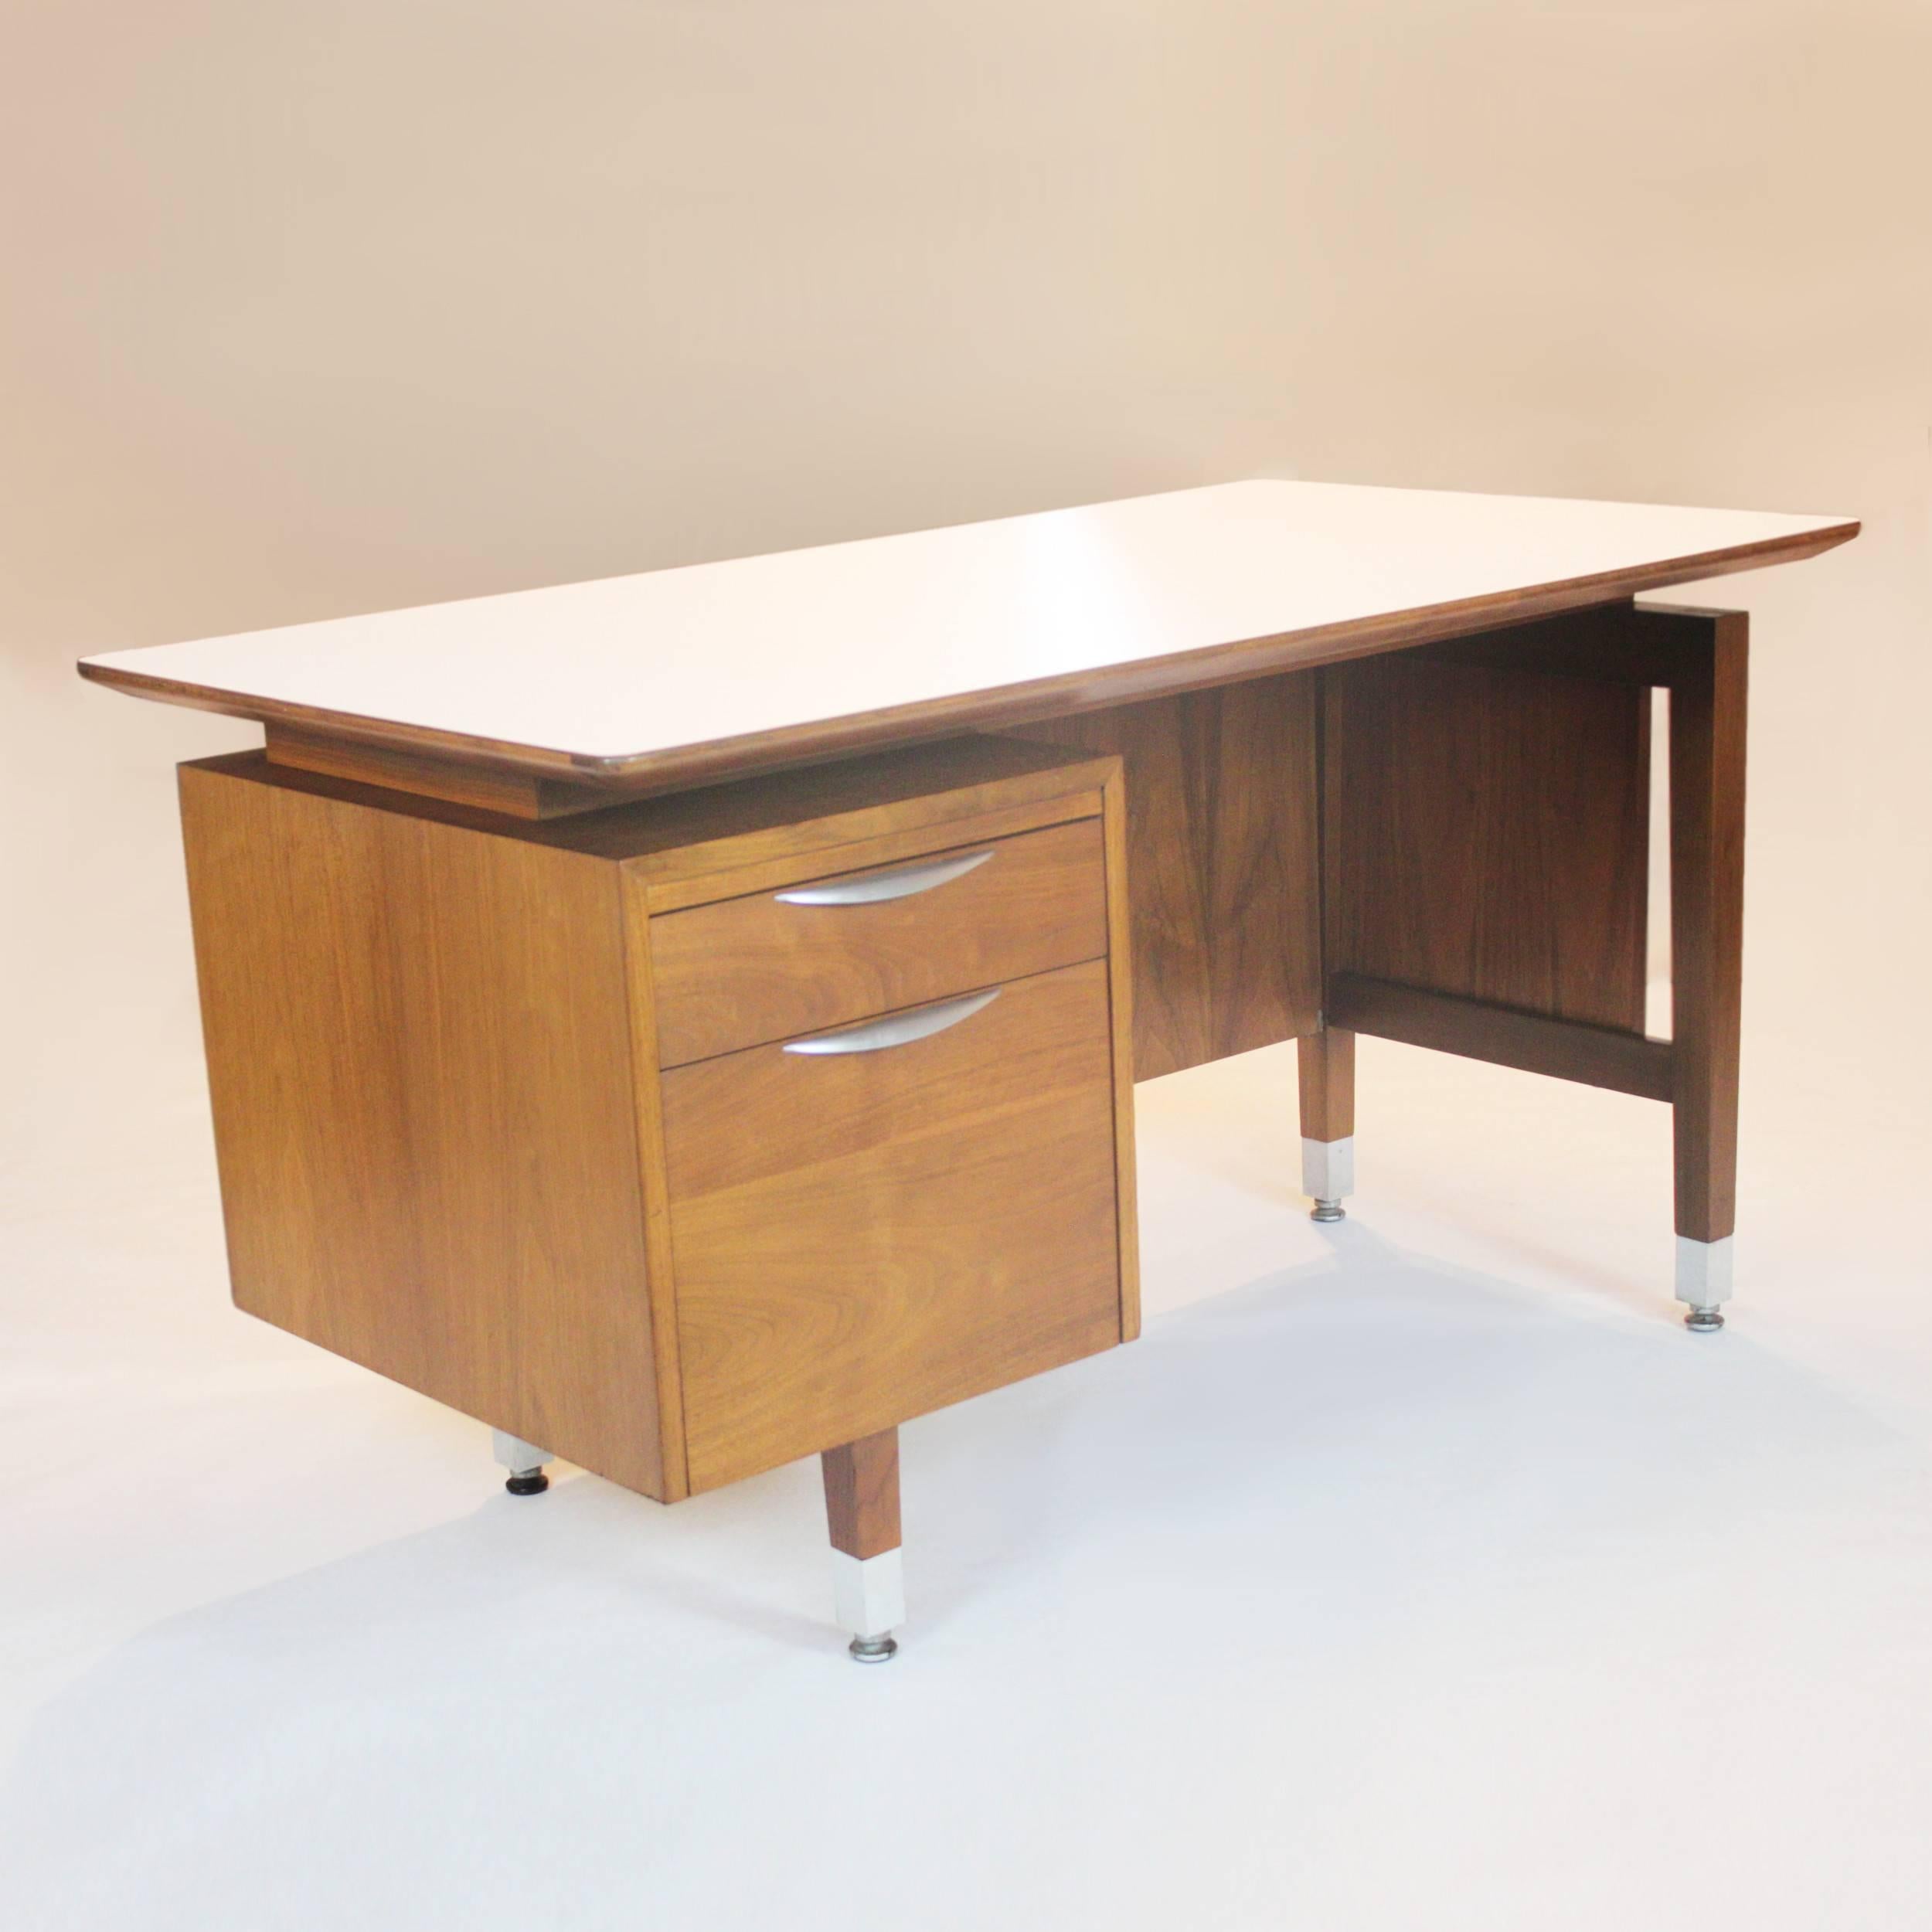 This wonderful Mid-Century Modern desk by Thonet of New york has the perfect amount of everything. The beautiful Jens Risom-Esqe design features a floating top with perfectly contrasting white formica and swoopy aluminum drawer pulls that tie in